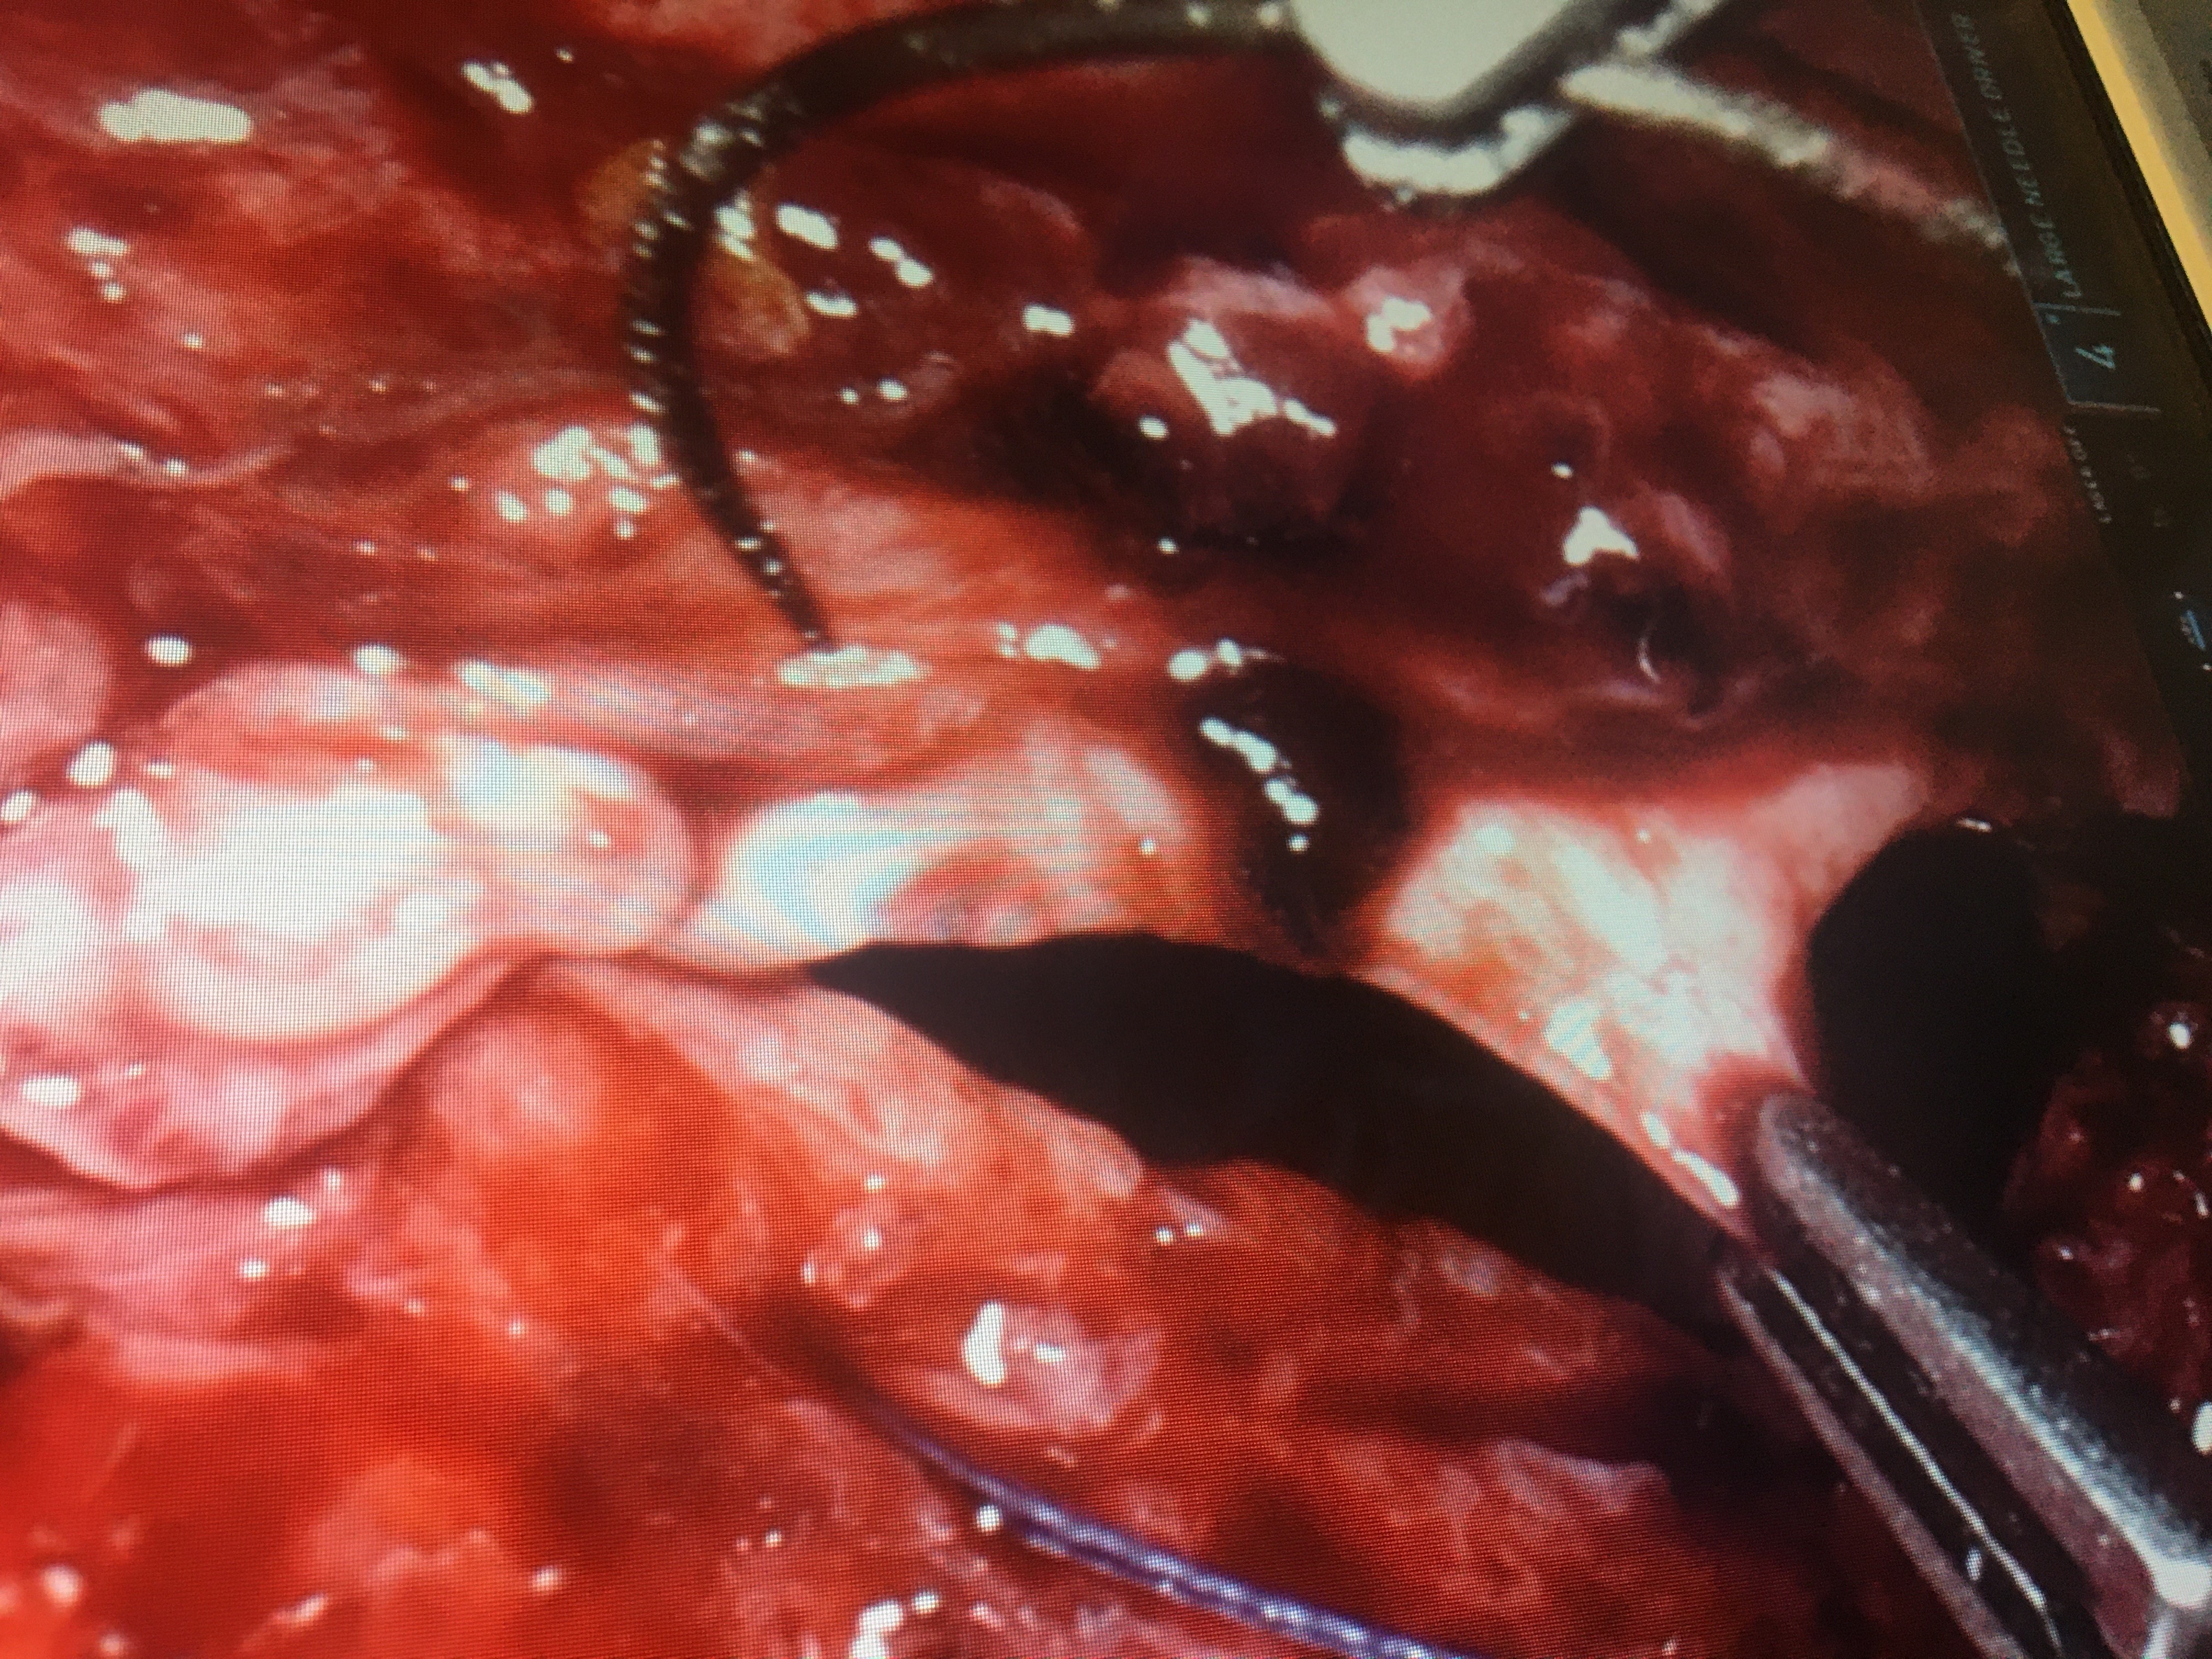 Case Report: Spontaneous Bladder Rupture after Intense Vomiting in a 25-YearOld Young Man, Surgically Treated with Robotic Method